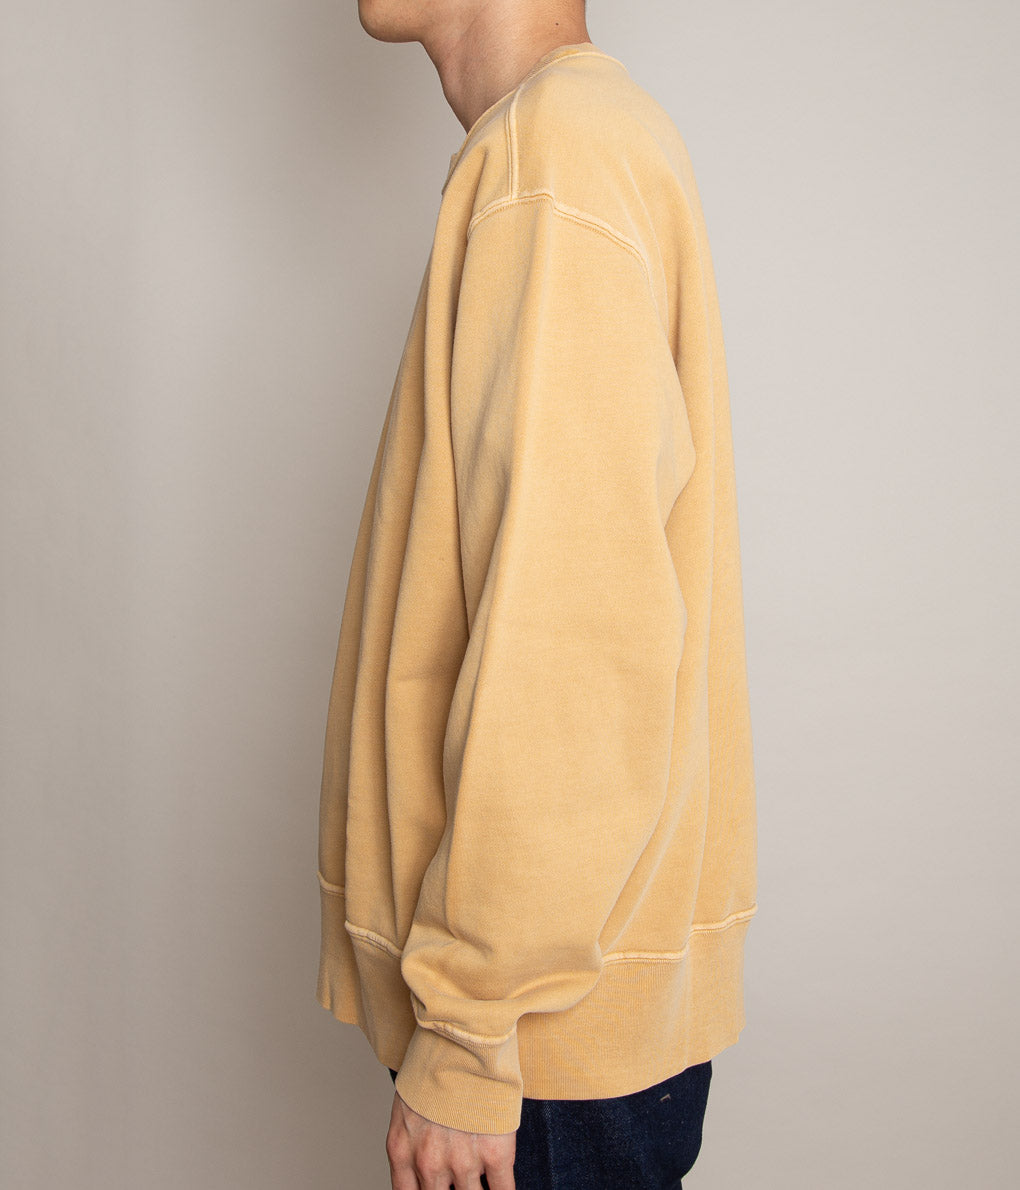 LADY WHITE CO. "RELAXED SWEATSHIRT"(MUSTERD PIGMENT)